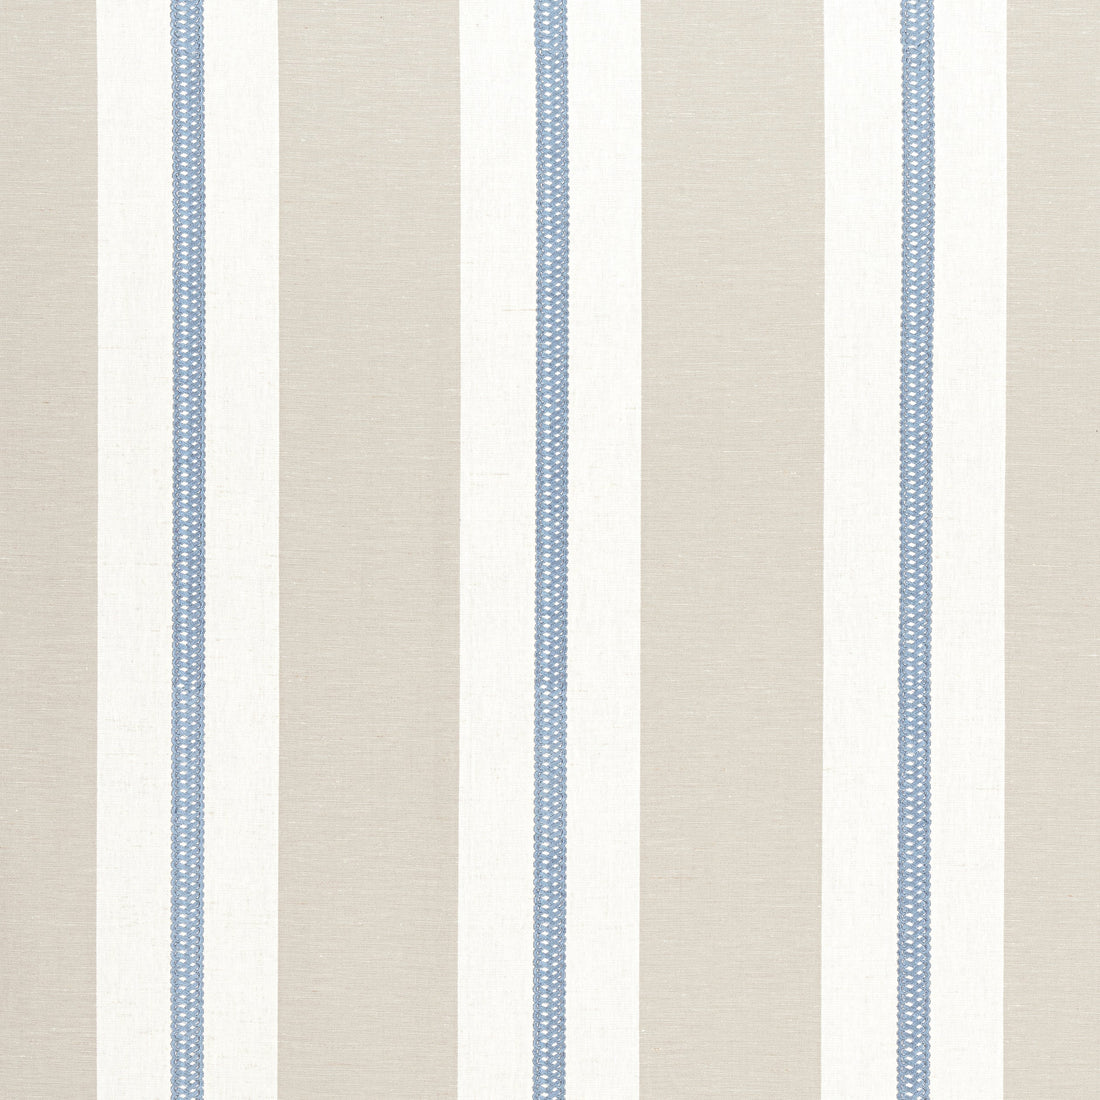 Alden Stripe Embroidery fabric in Sky color - pattern number AW24531 - by Anna French in the Devon collection